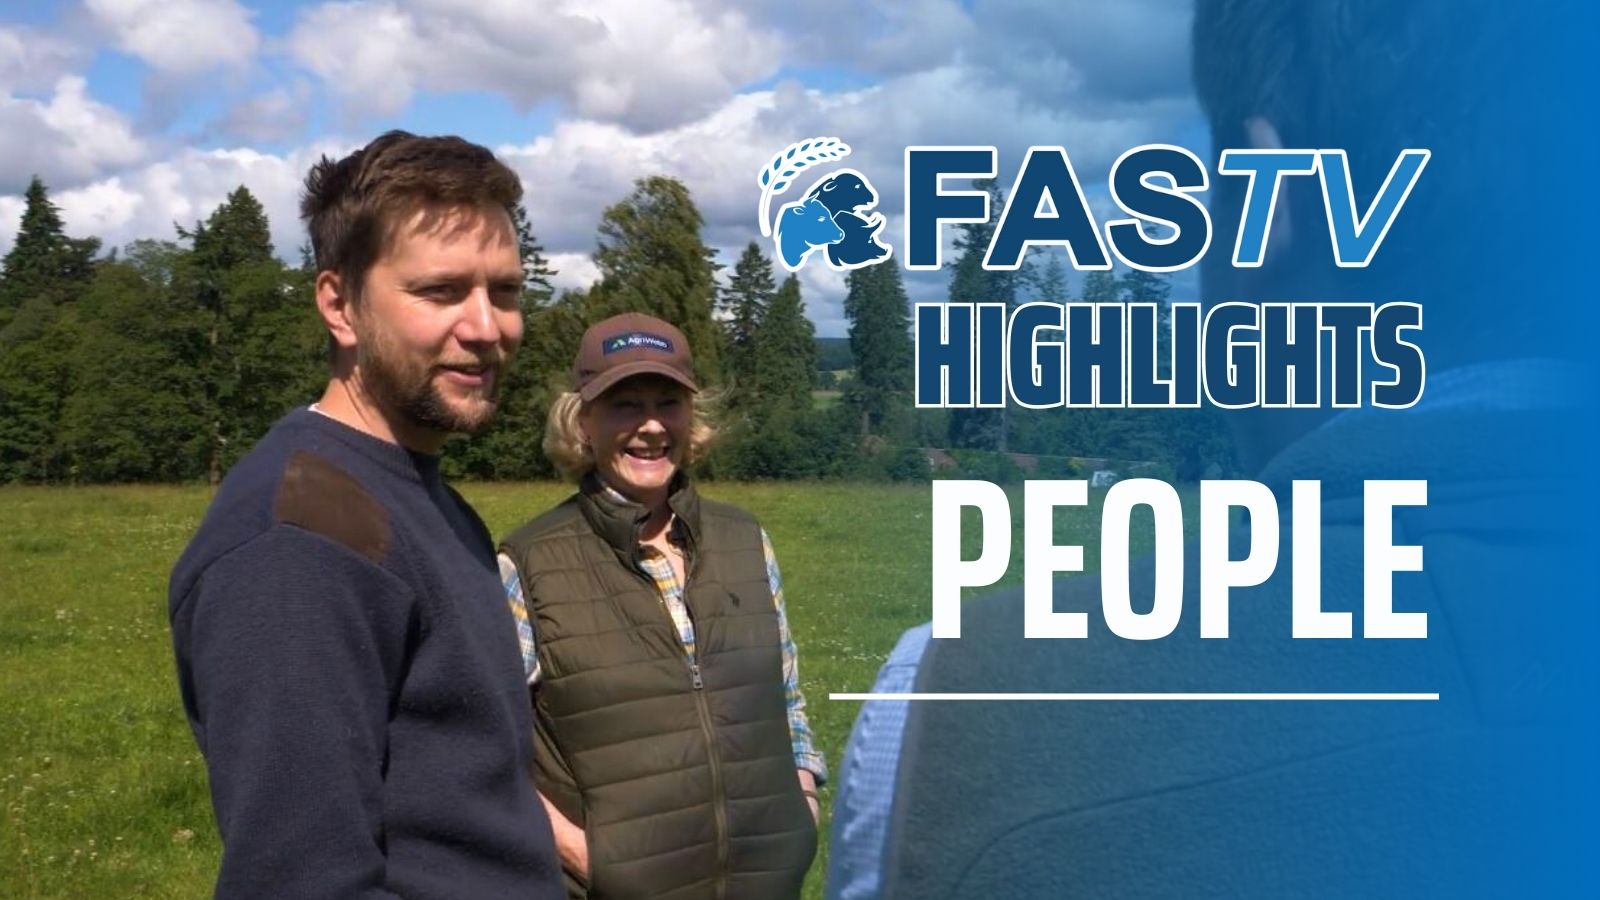 FAS TV Highlights People